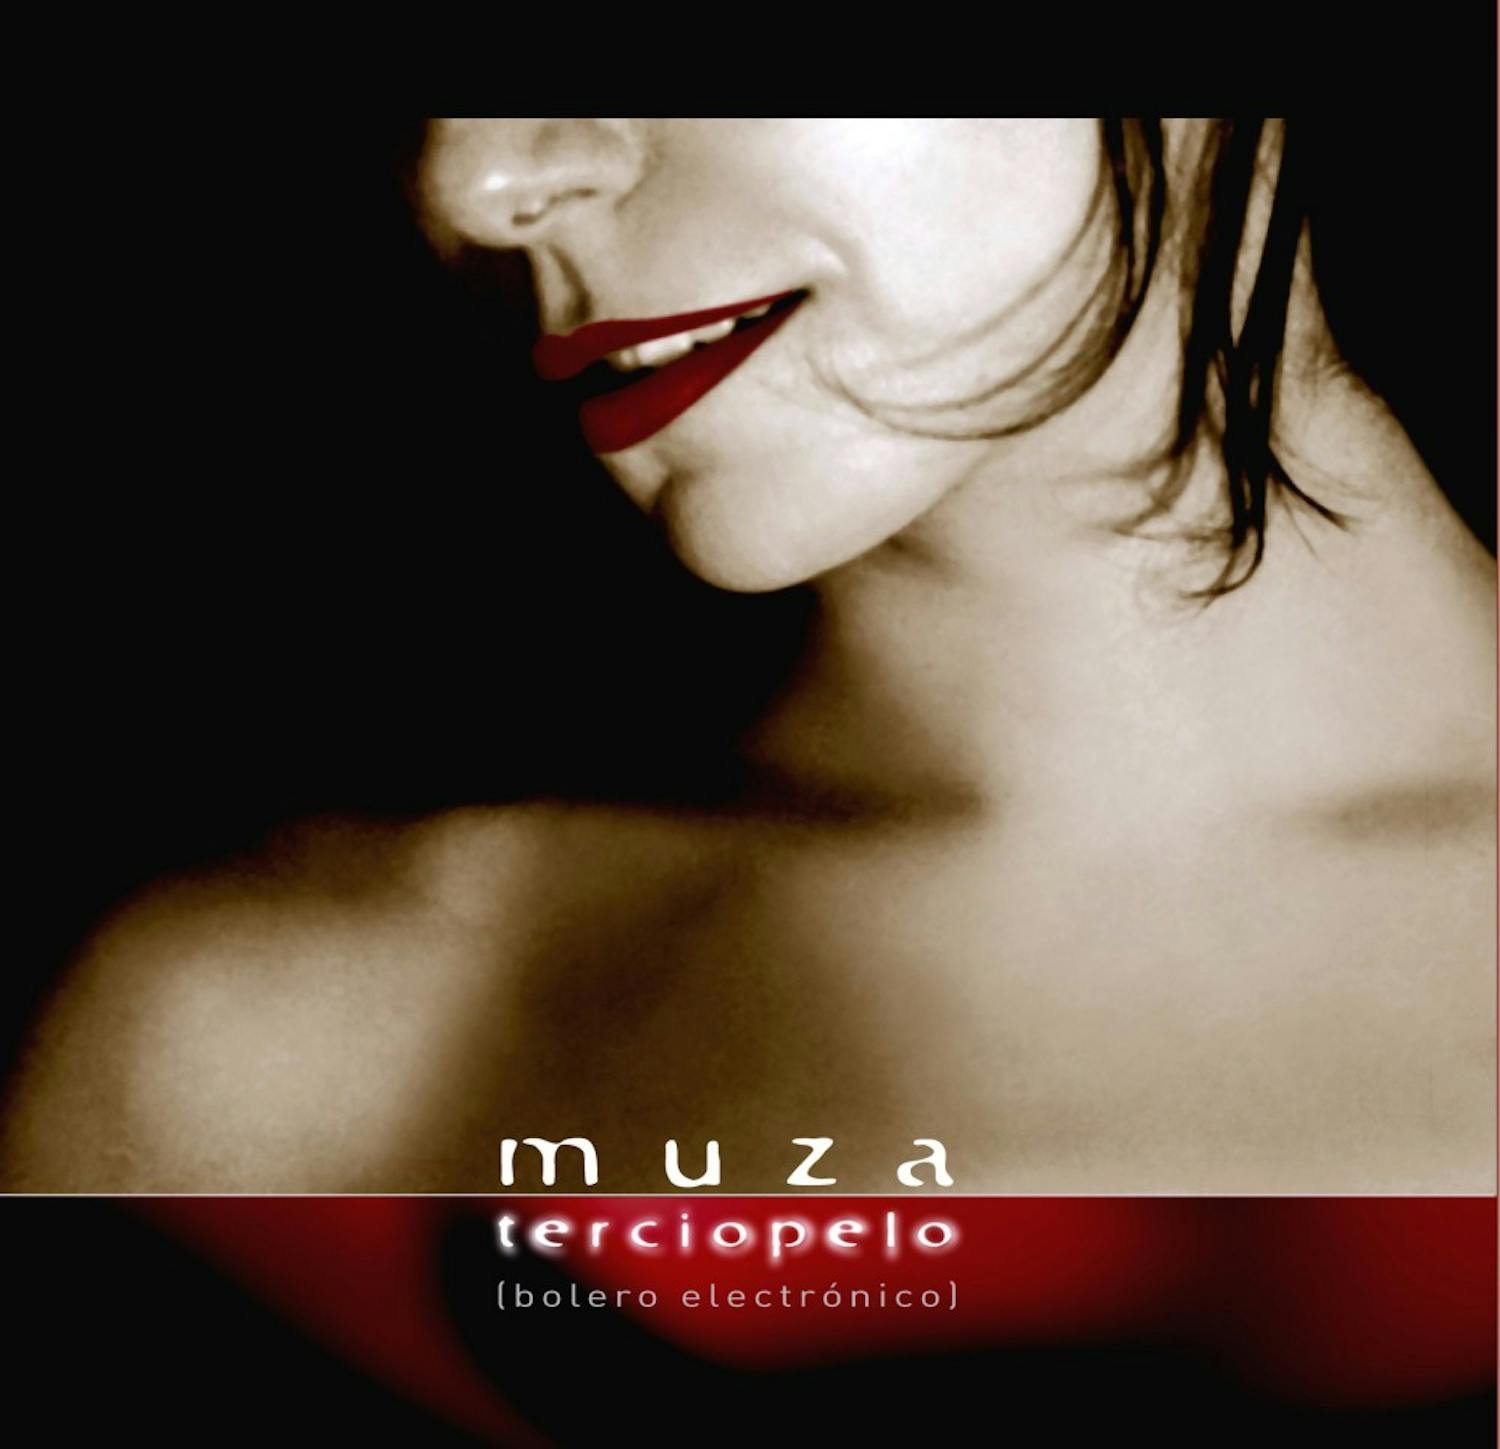 	Chilean native Sol Aravena created Muza, a group with Latin and electronic sounds. The band will perform at QBar in Hotel Albuquerque on Friday at 8 p.m.